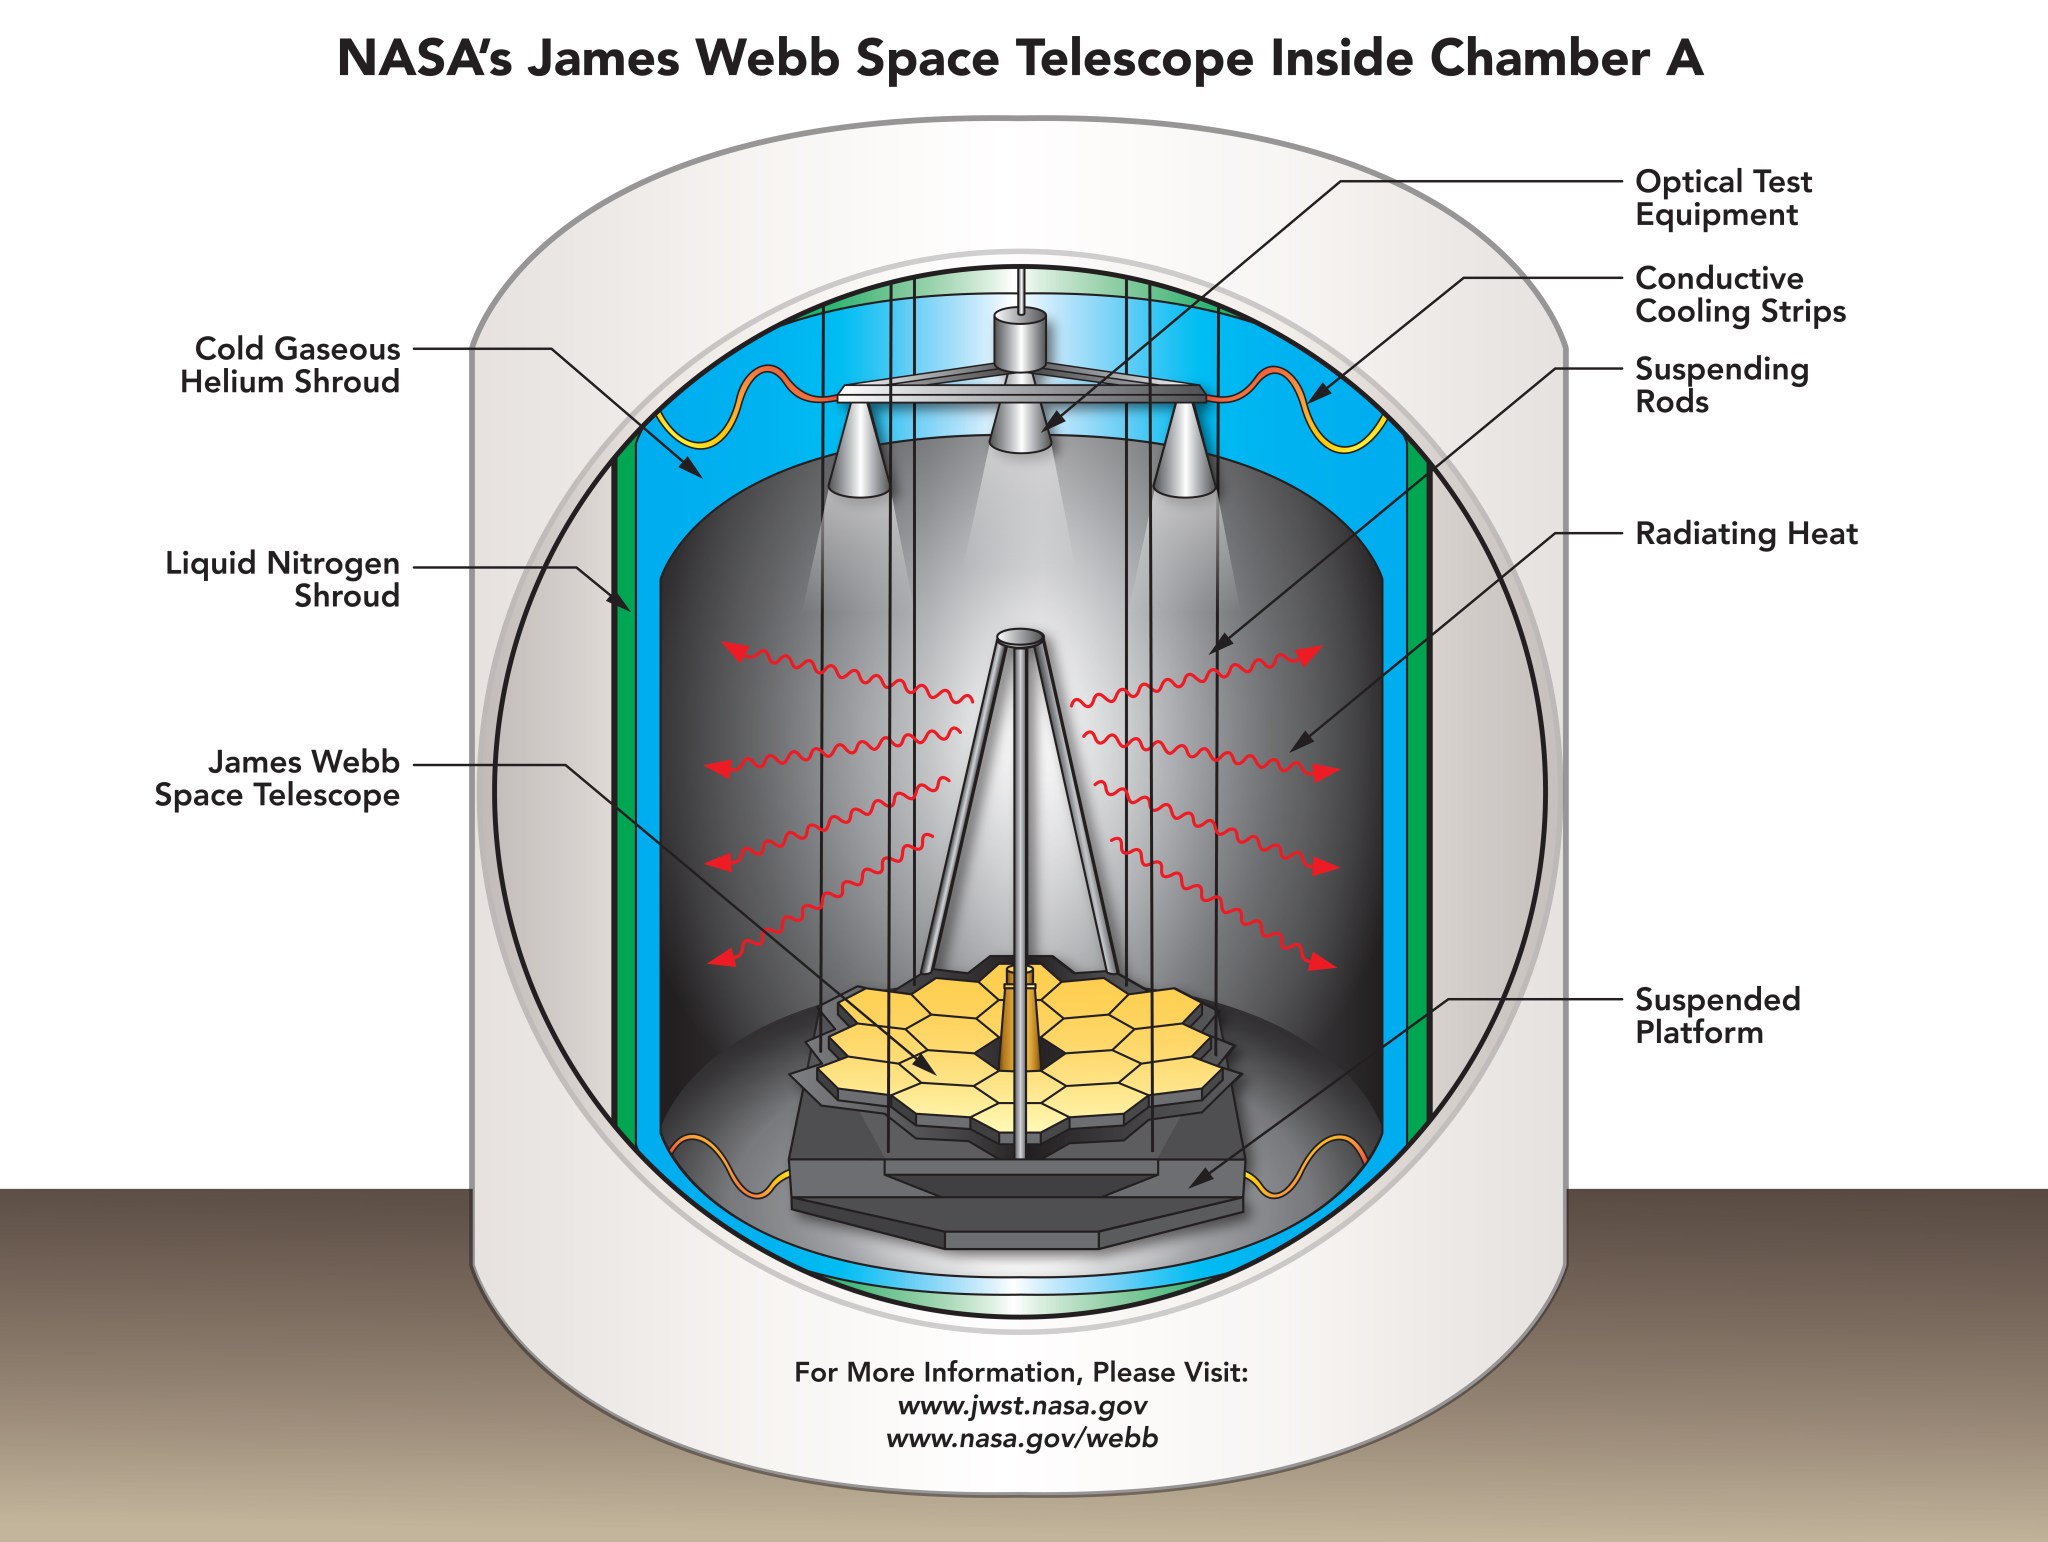 Webb cools to cryogenic temperatures by radiating heat through the surrounding vacuum.